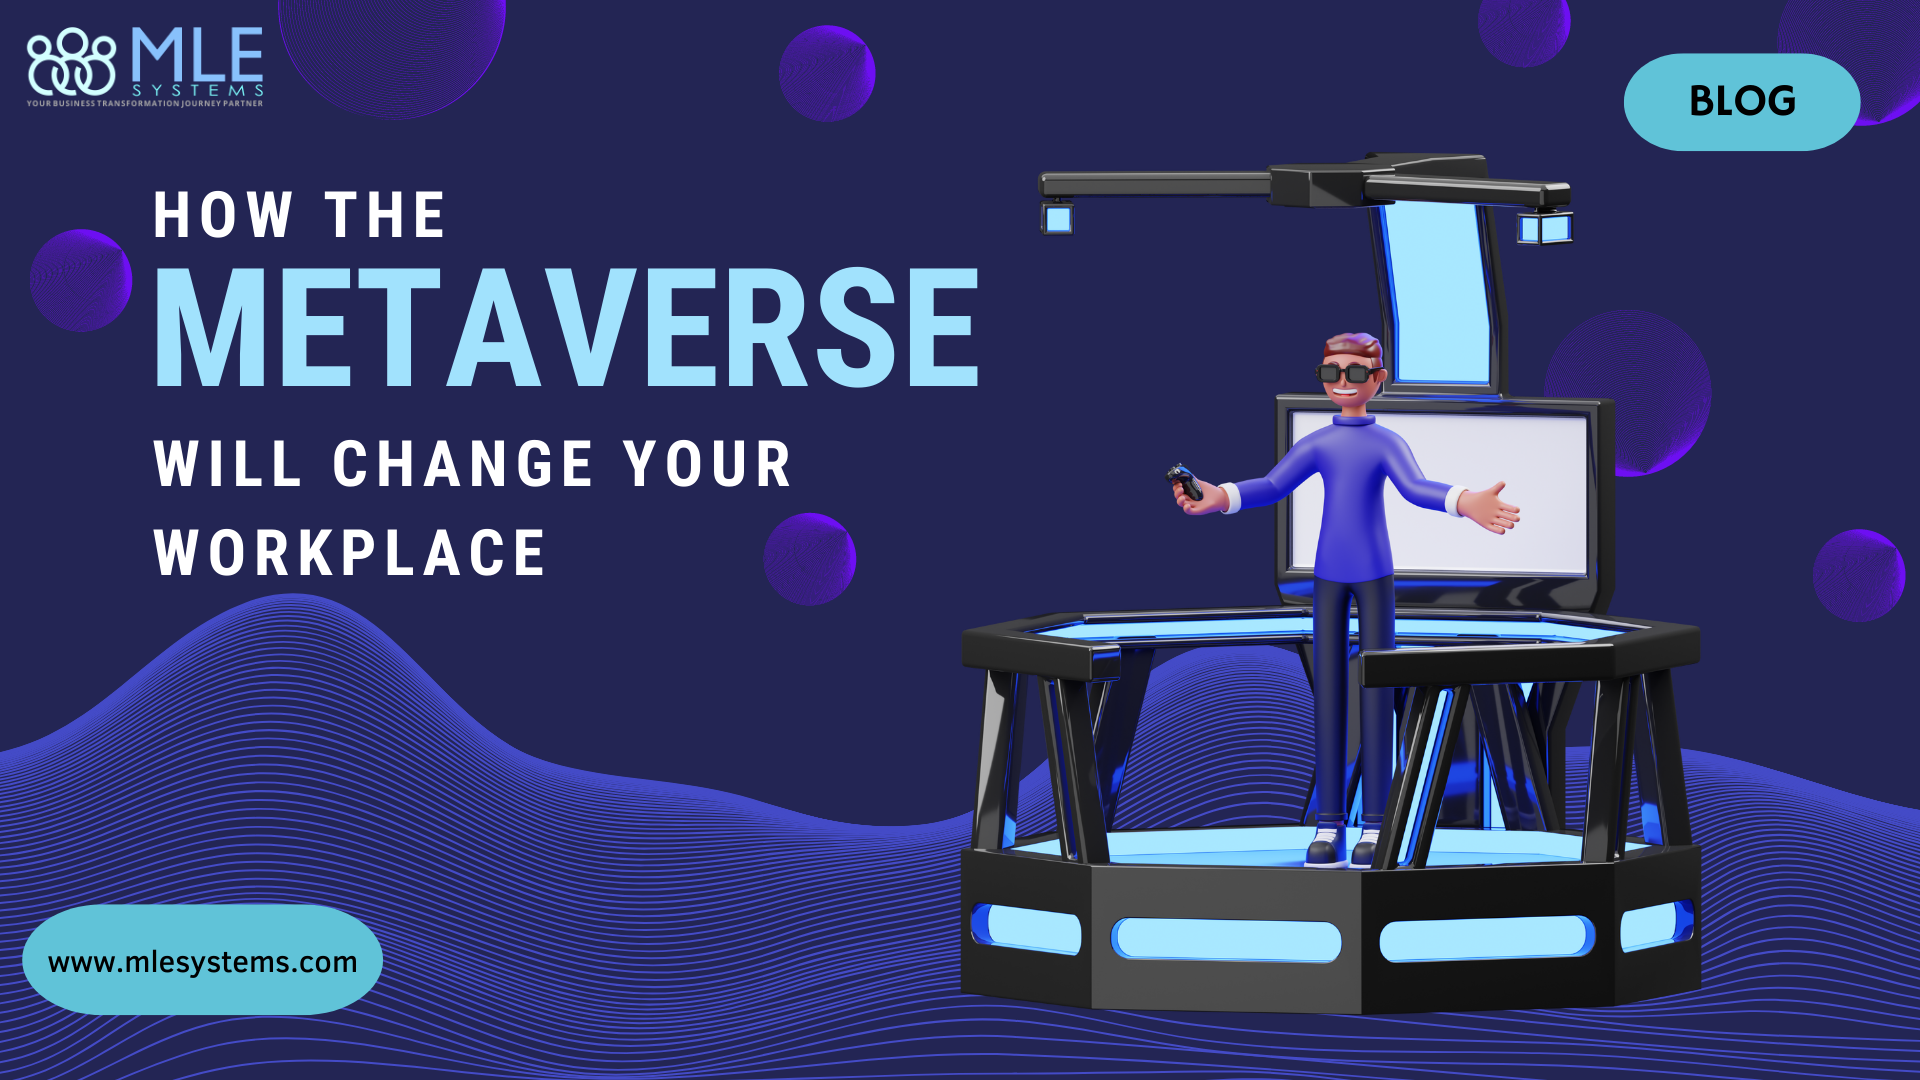 How the Metaverse will change your workplace